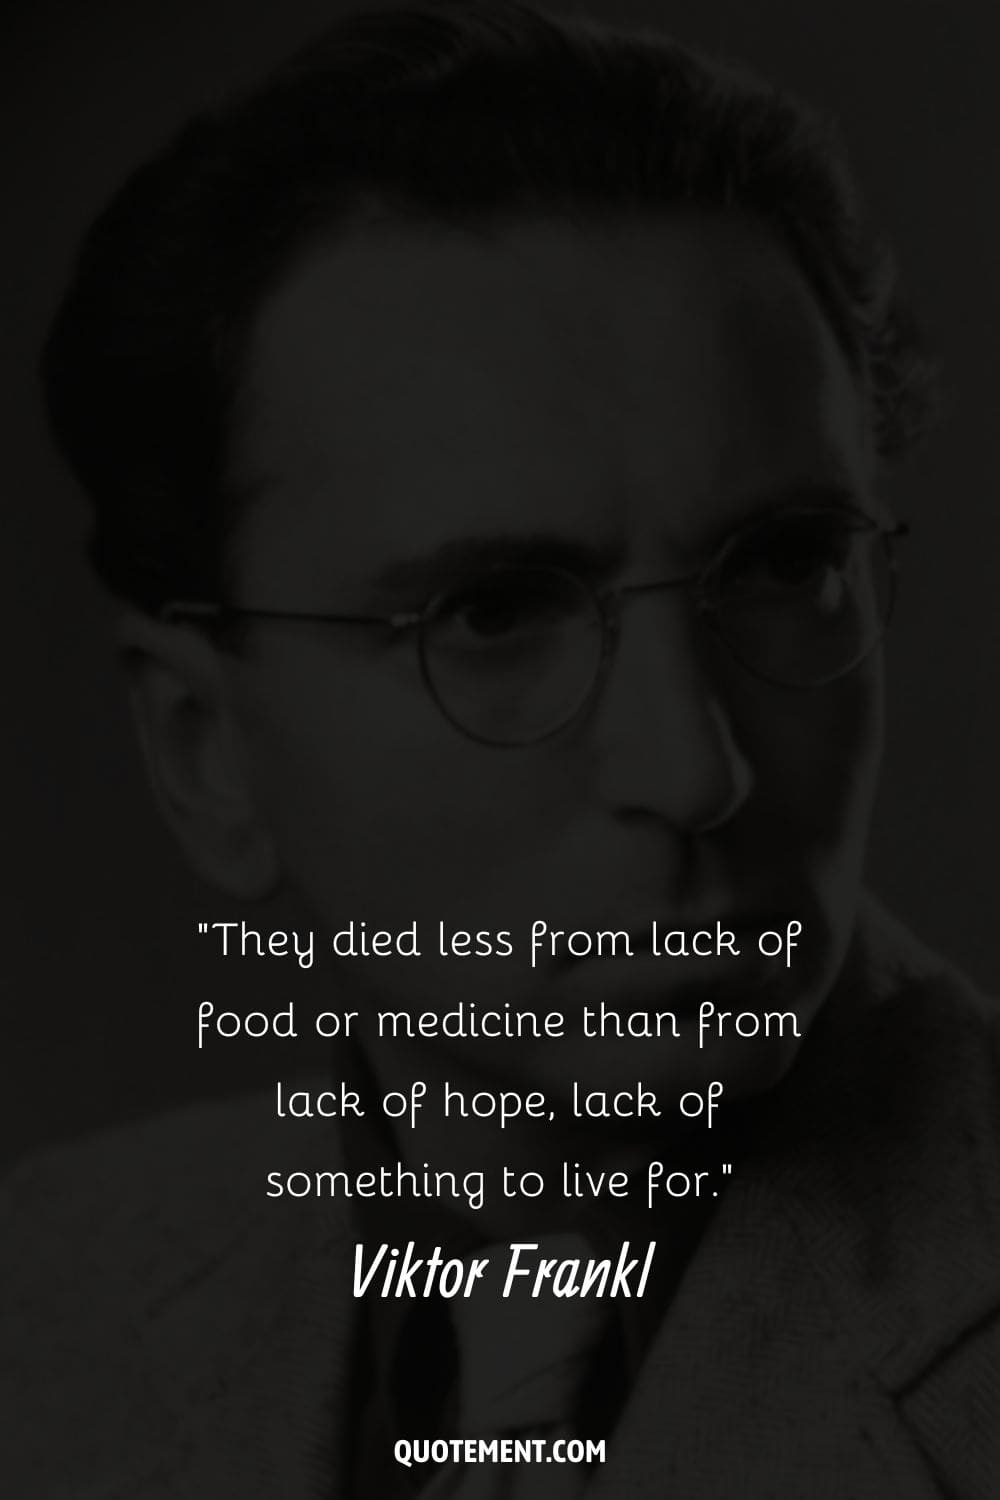 Viktor Frankl's image representing his quote on hope.